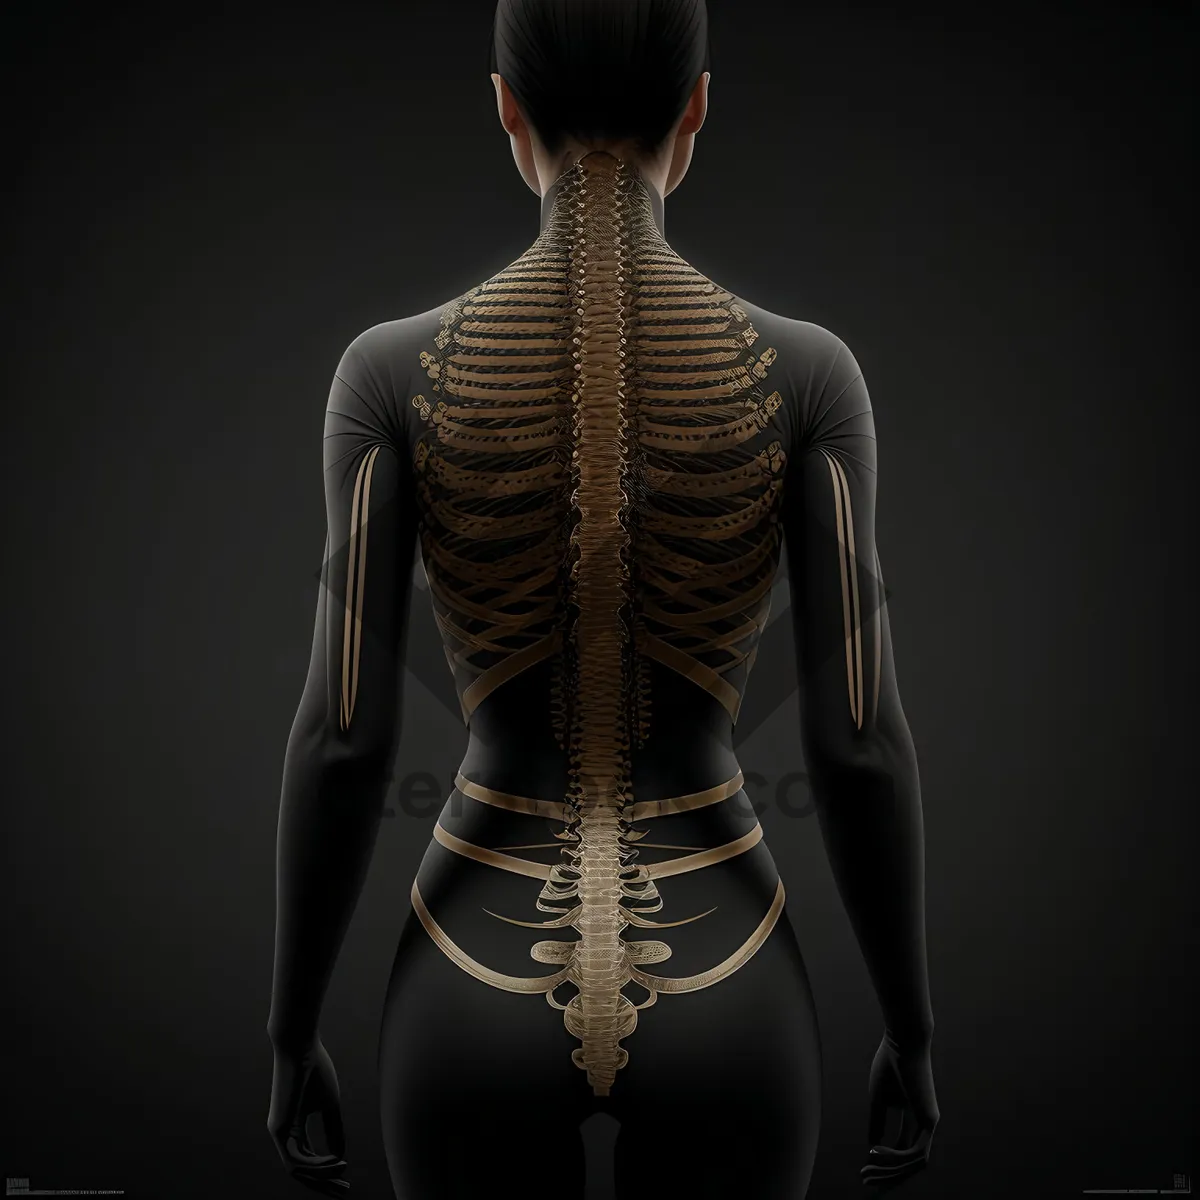 Picture of Human Skeleton - Anatomy and Health